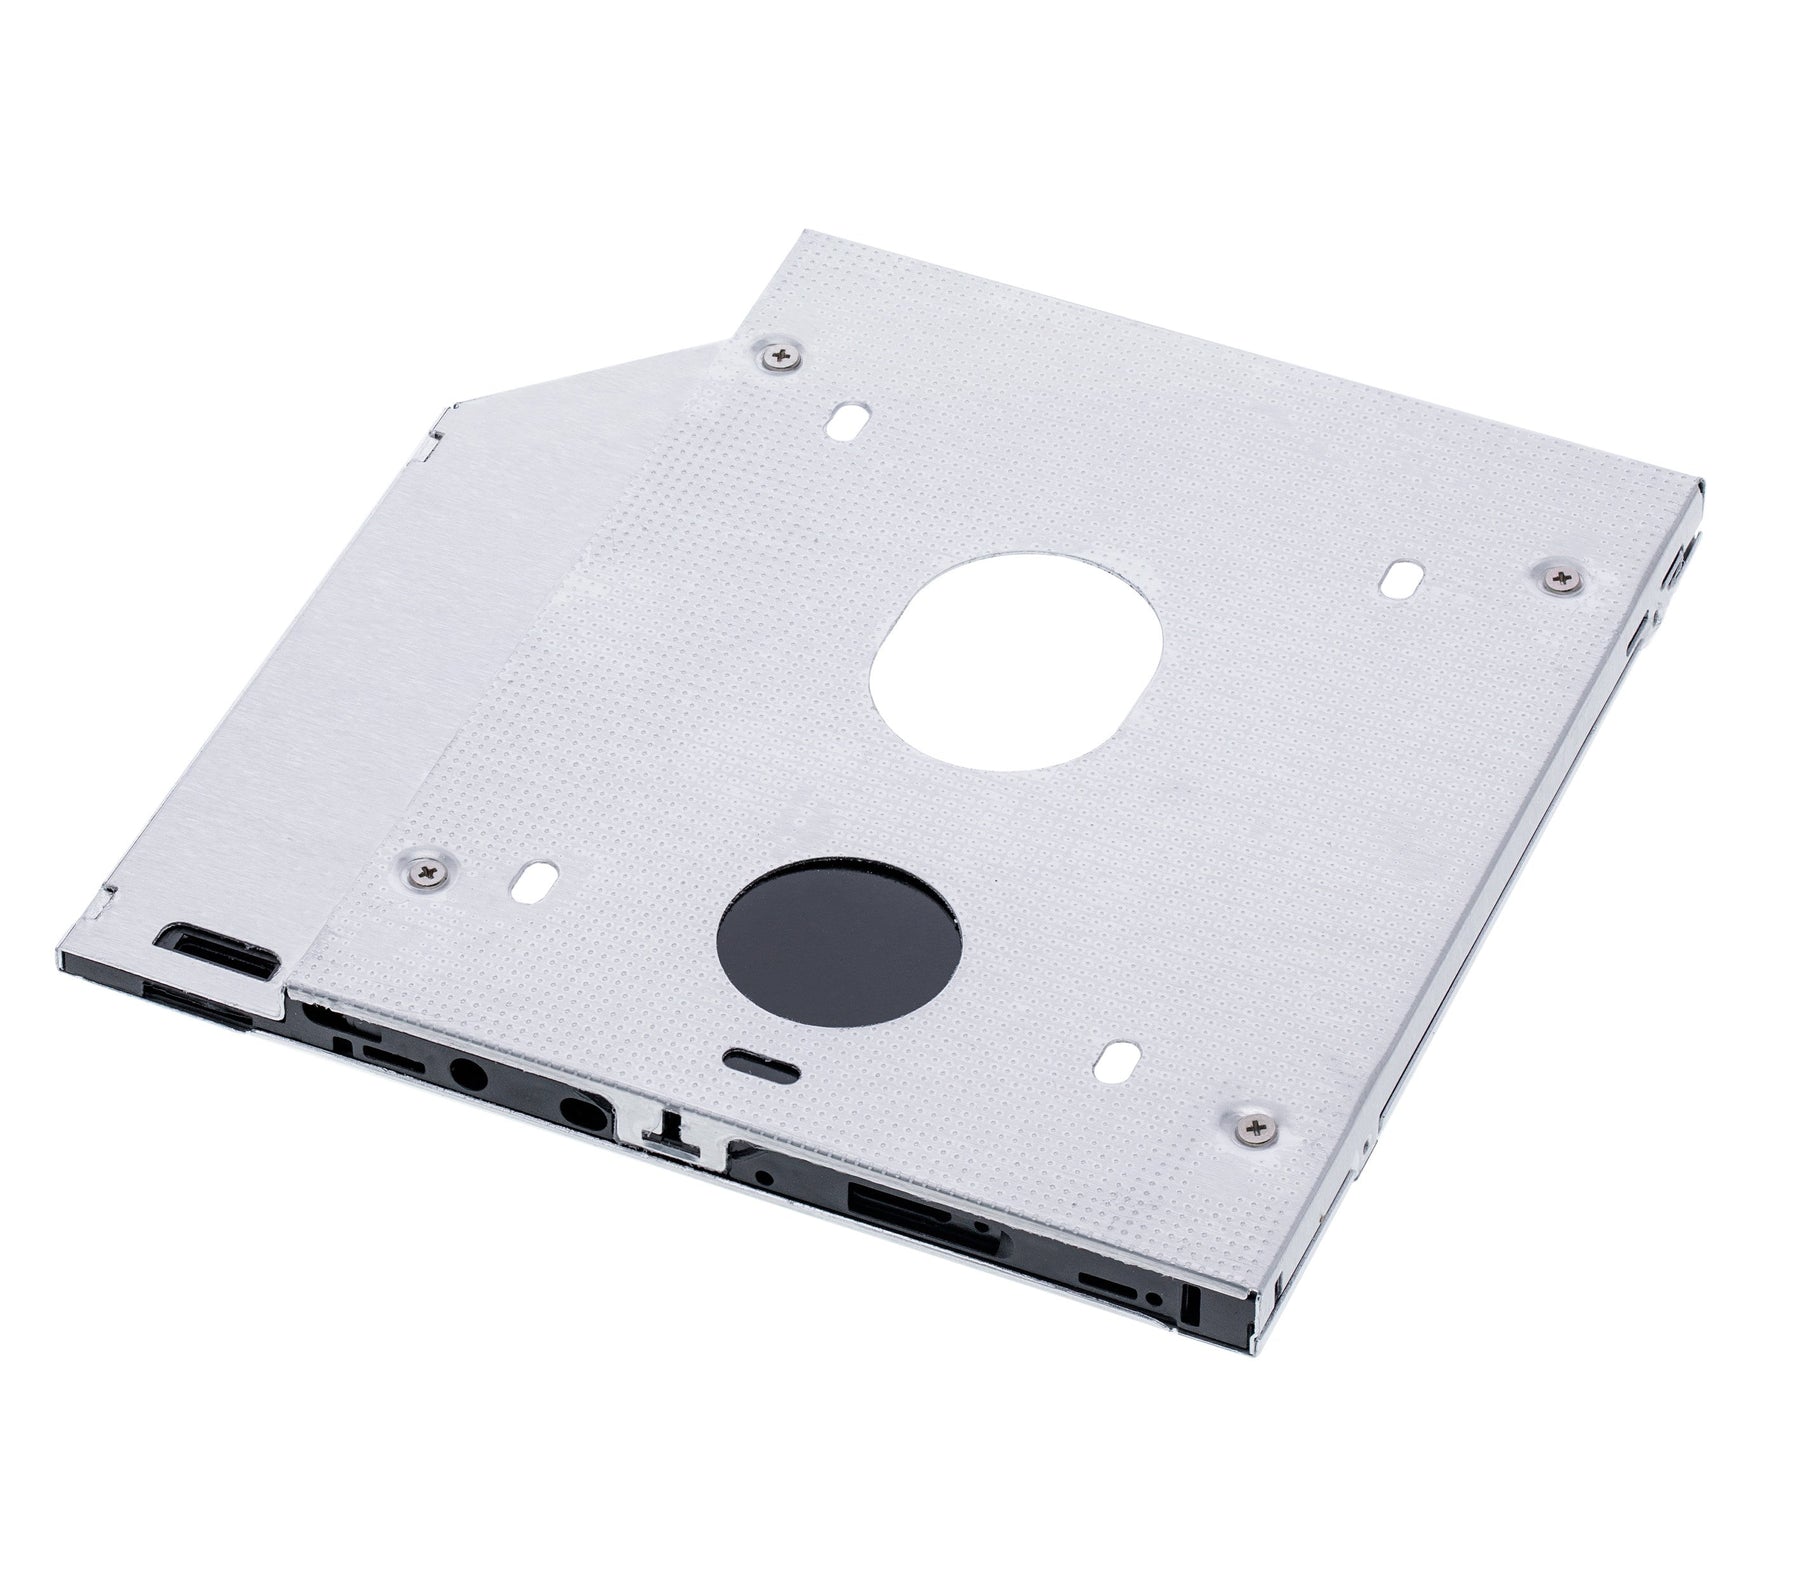 HARD DRIVE TRAY CADDY COMPATIBLE FOR MACBOOK UNIBODY 13" A1342 (LATE 2009 / MID 2010)